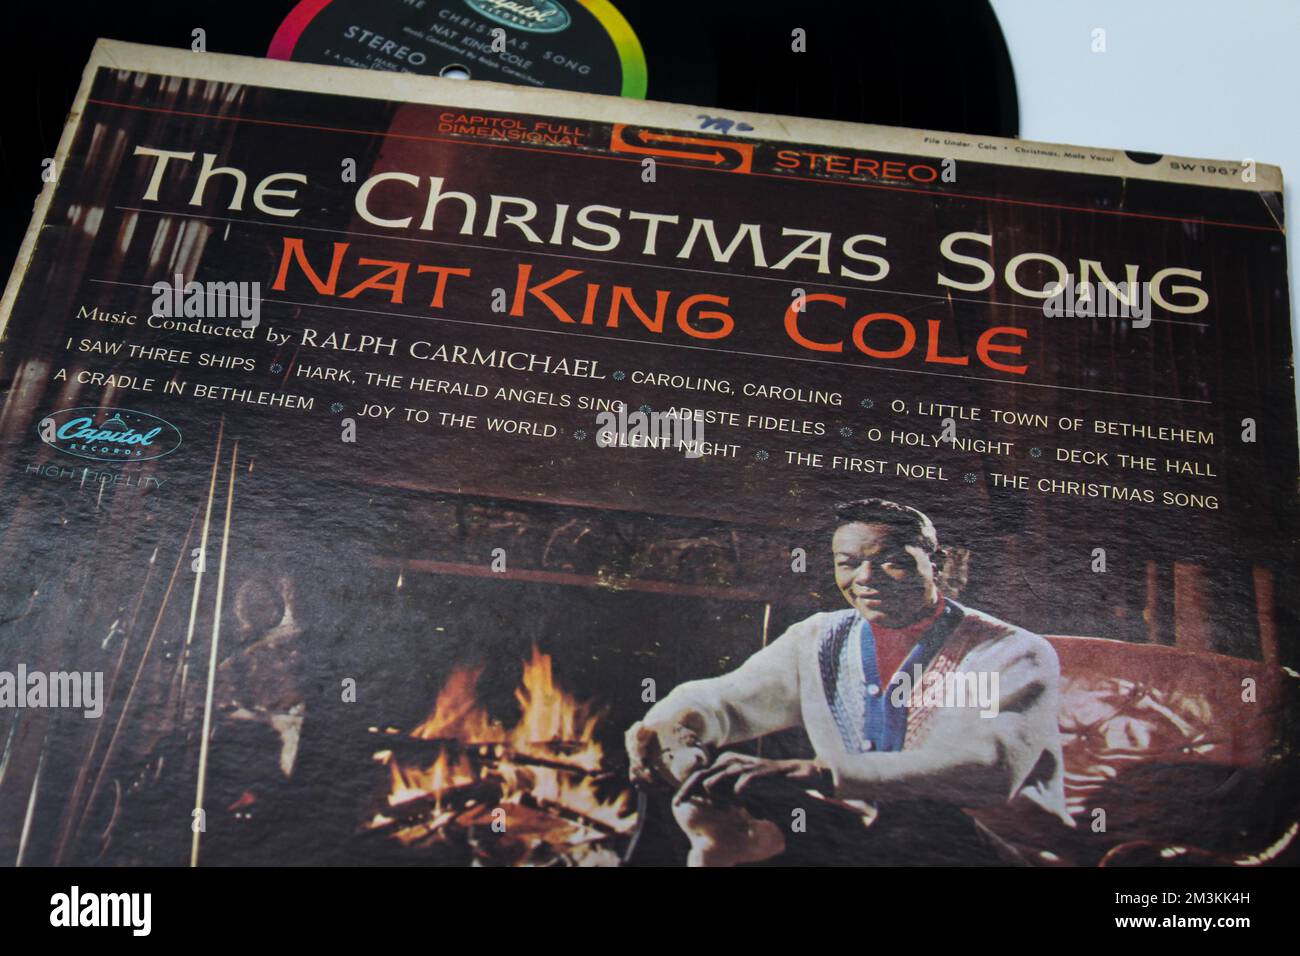 Jazz artist, Nat King Cole music album on vinyl record LP disc. Titled: The Christmas Song album cover Stock Photo